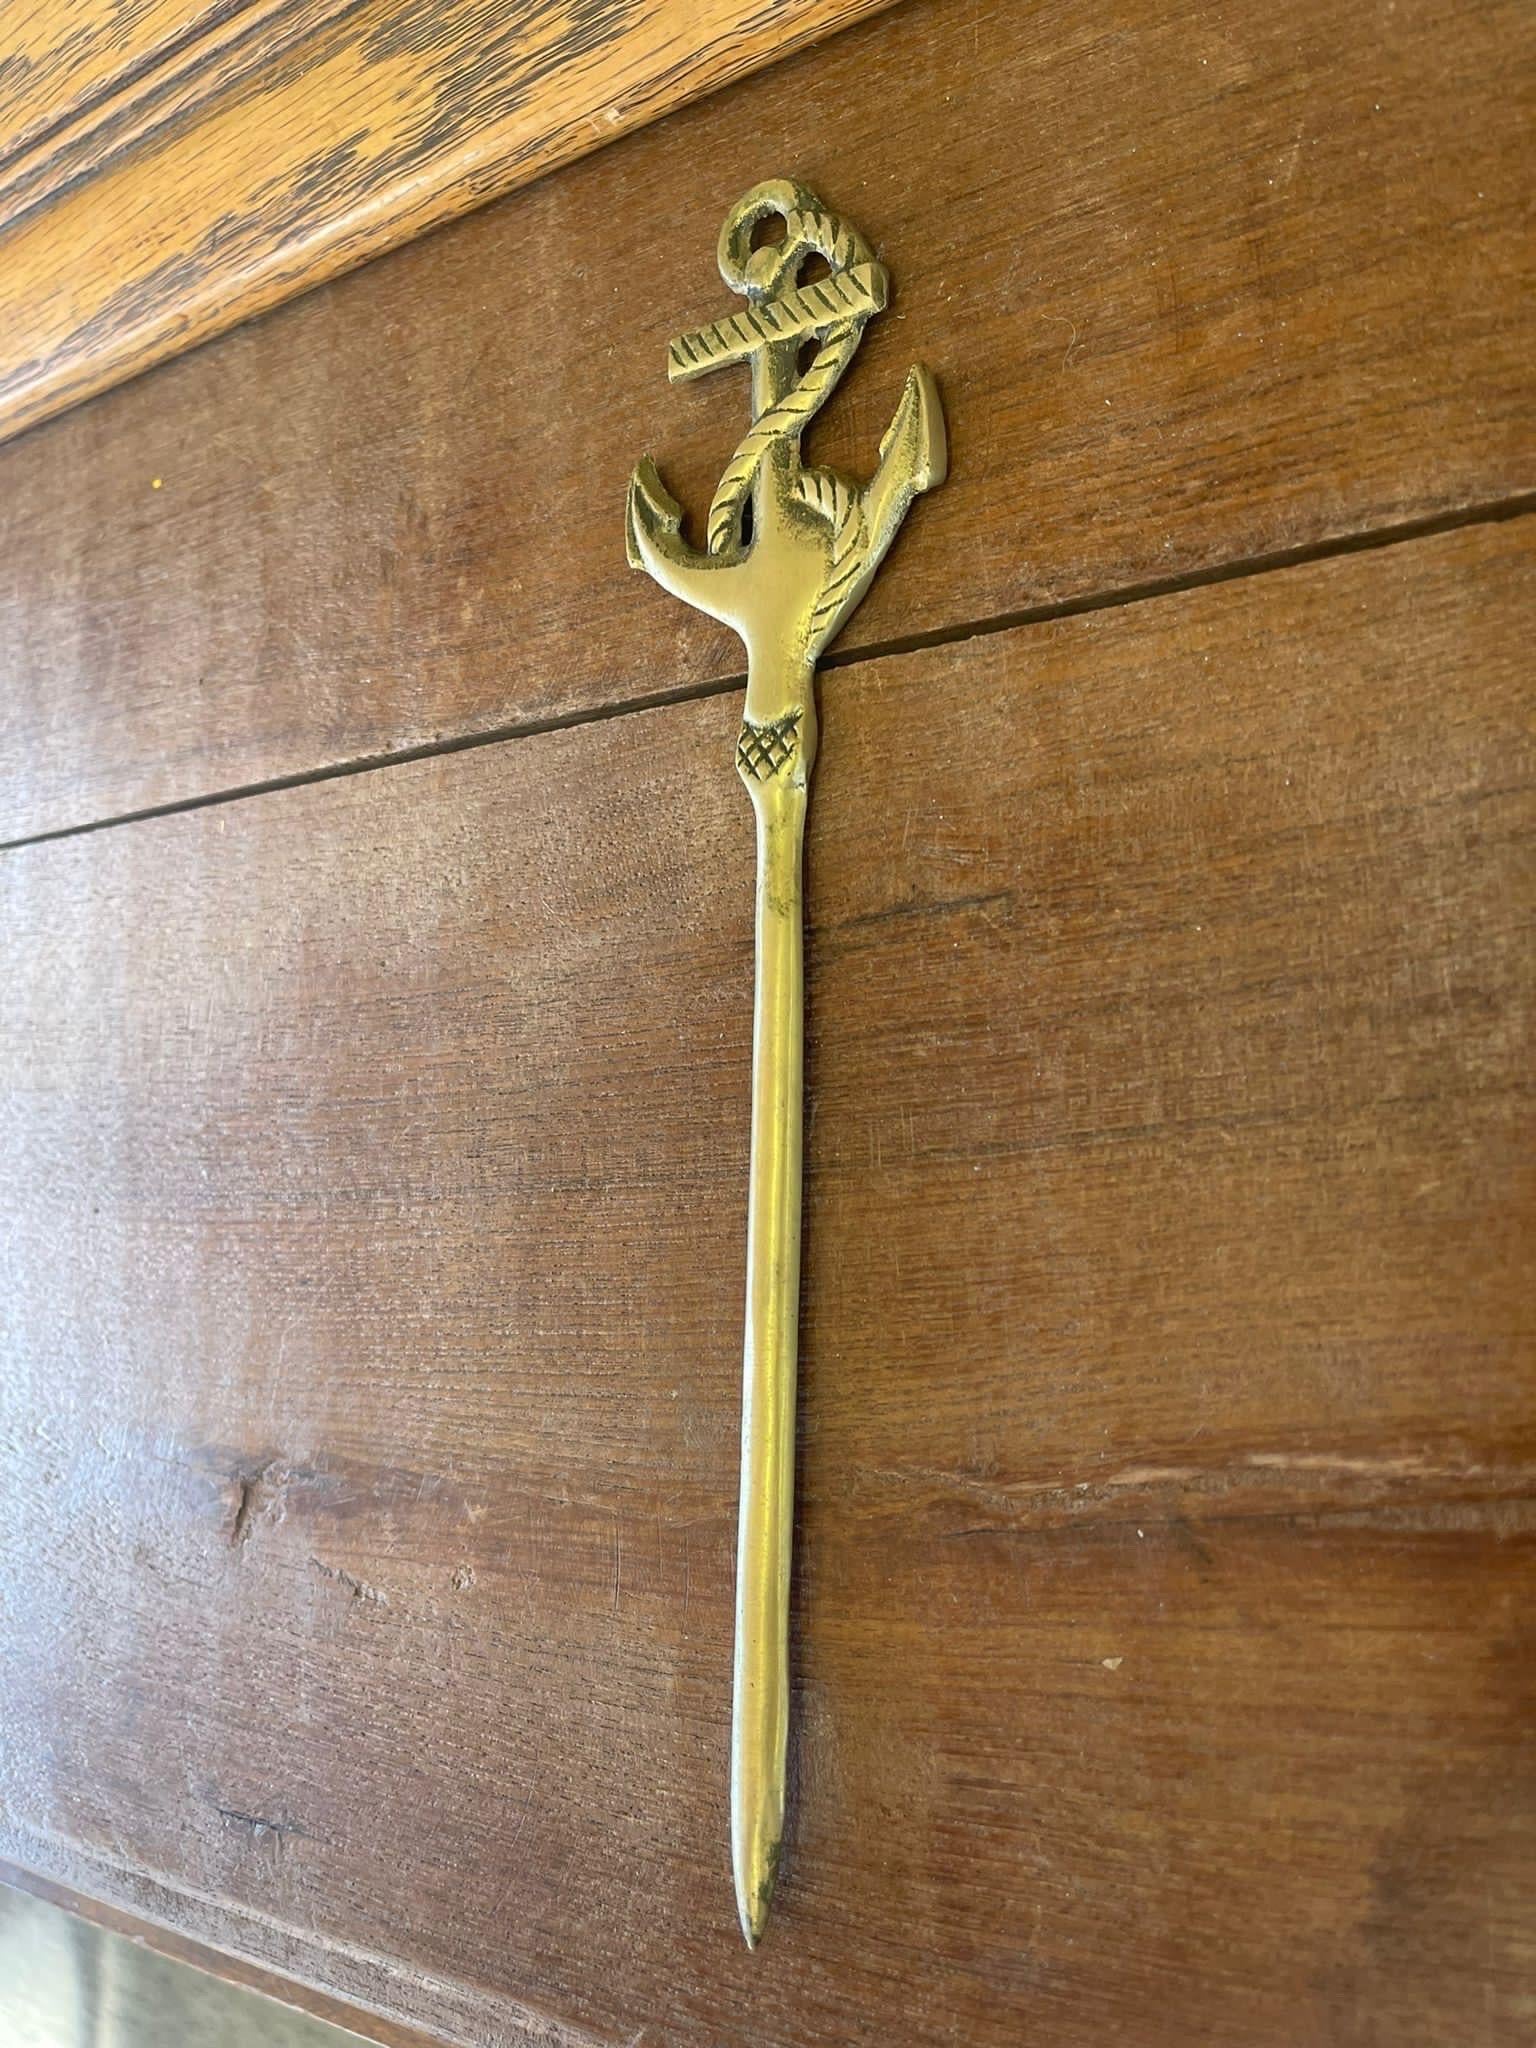 Letter Opener with Anchor and Rope Details at the Top. Vintage Condition Consistent with Age as Pictured.

Dimensions. 9 W ; 2 D ; 1/4 H